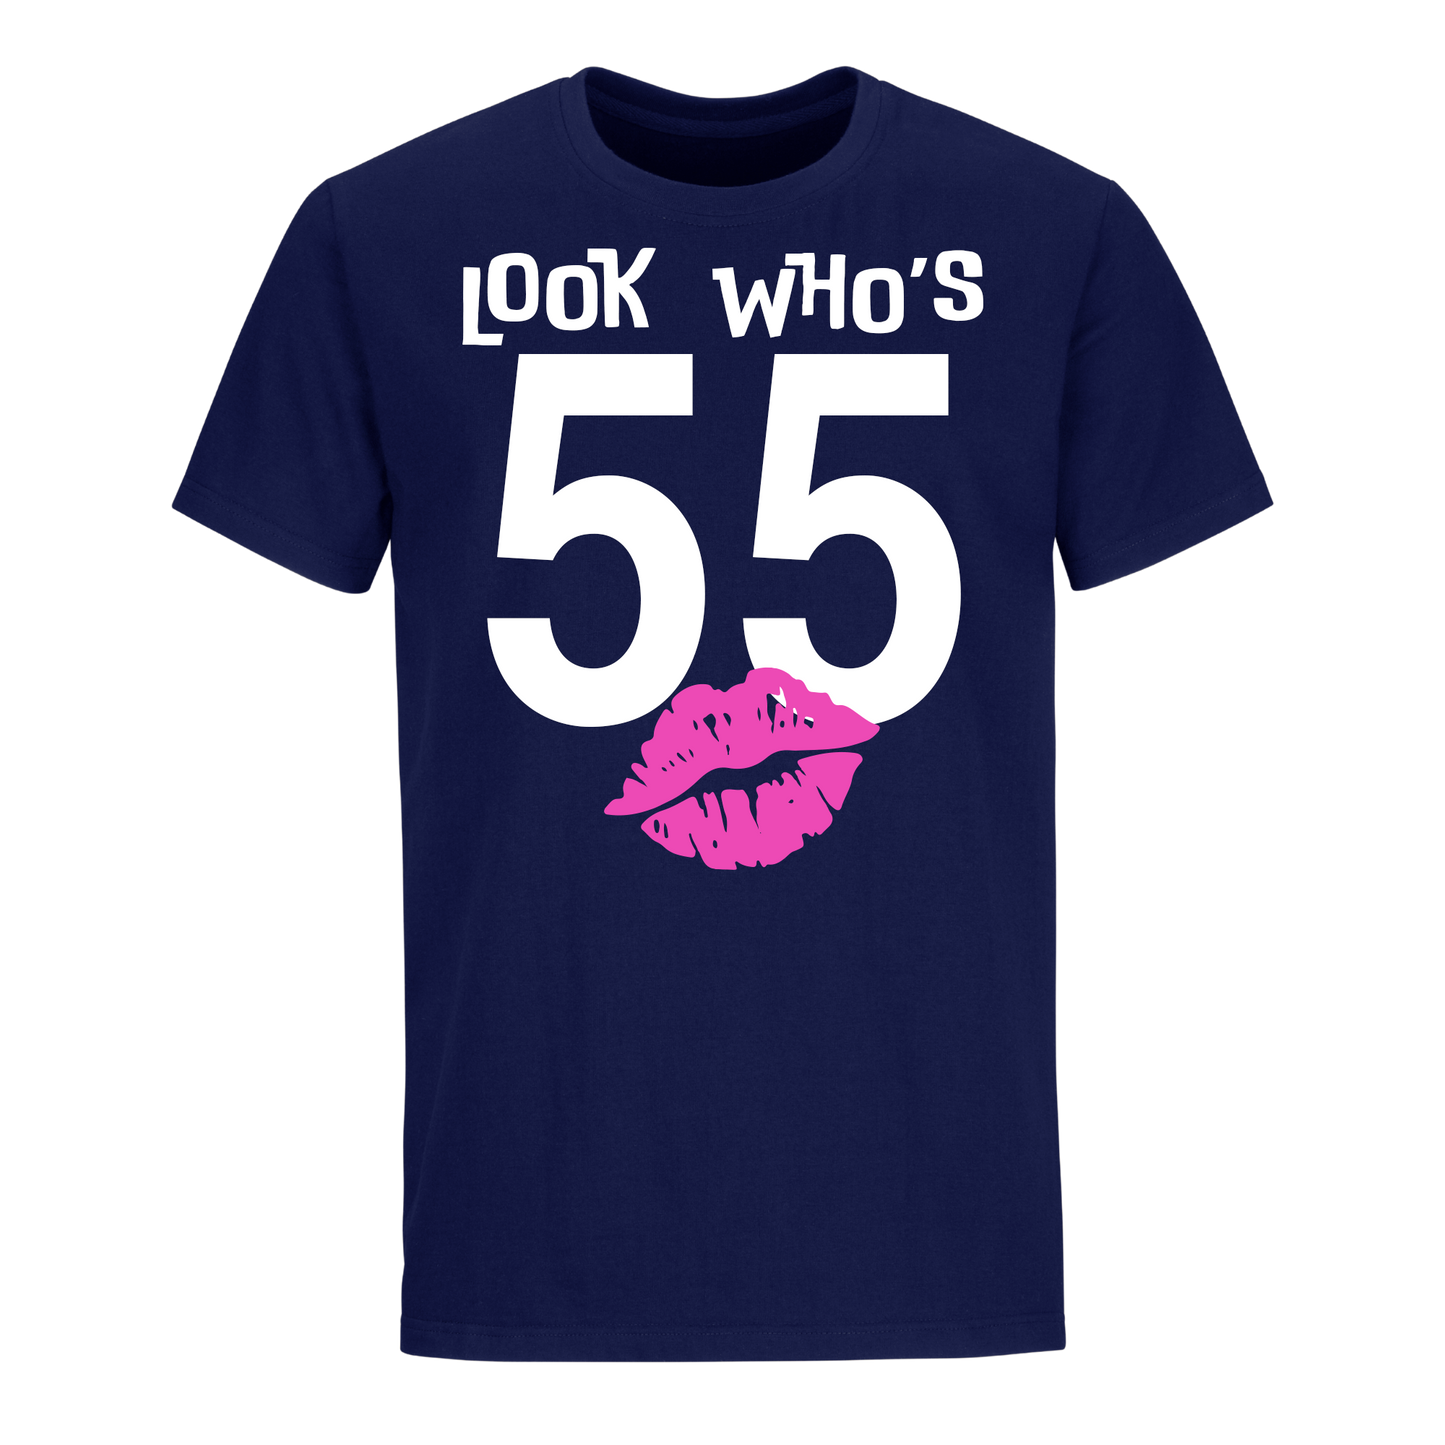 LOOK WHO'S 55 UNISEX SHIRT